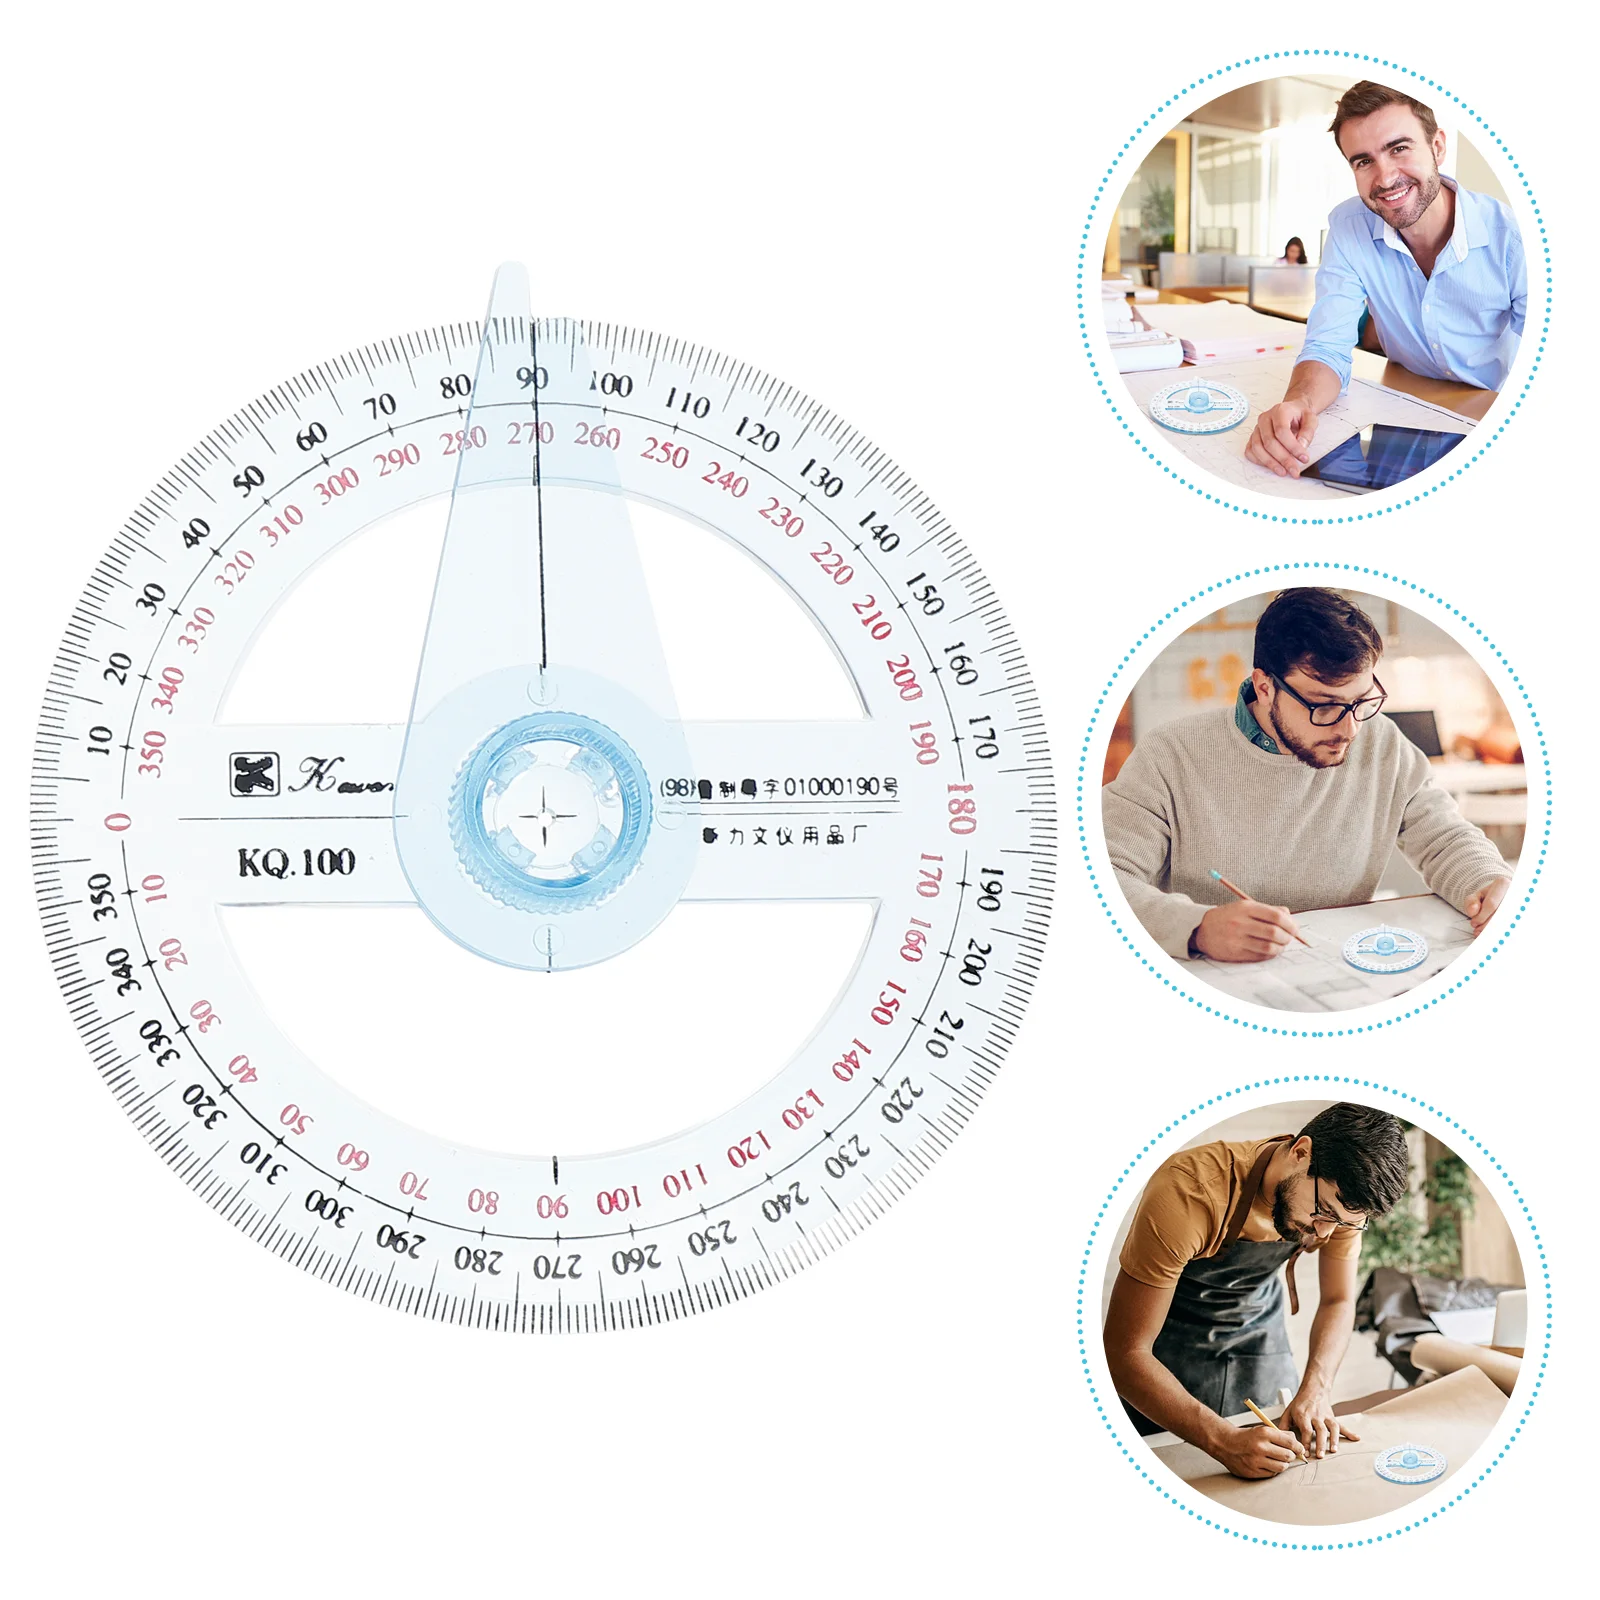 2pcs Circle Protractor 360 Degree Protractor Ruler Math Geometry Tools for School Classroom Office Drafting Measuring Supplies 360 degree mini digital protractor inclinometer electronic level box magnetic base measuring tools